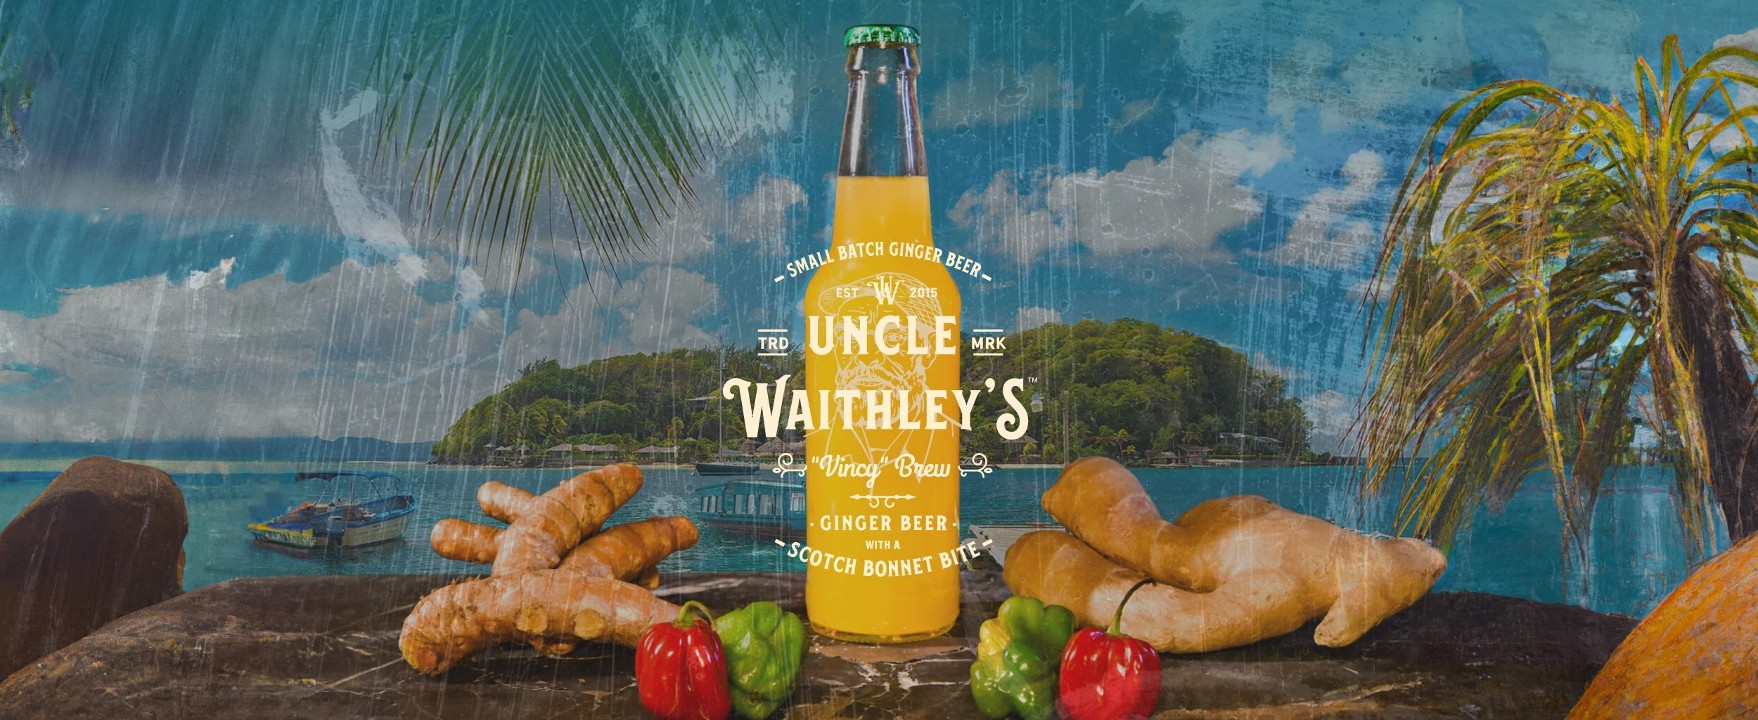 Uncle Waithley Ginger Beer